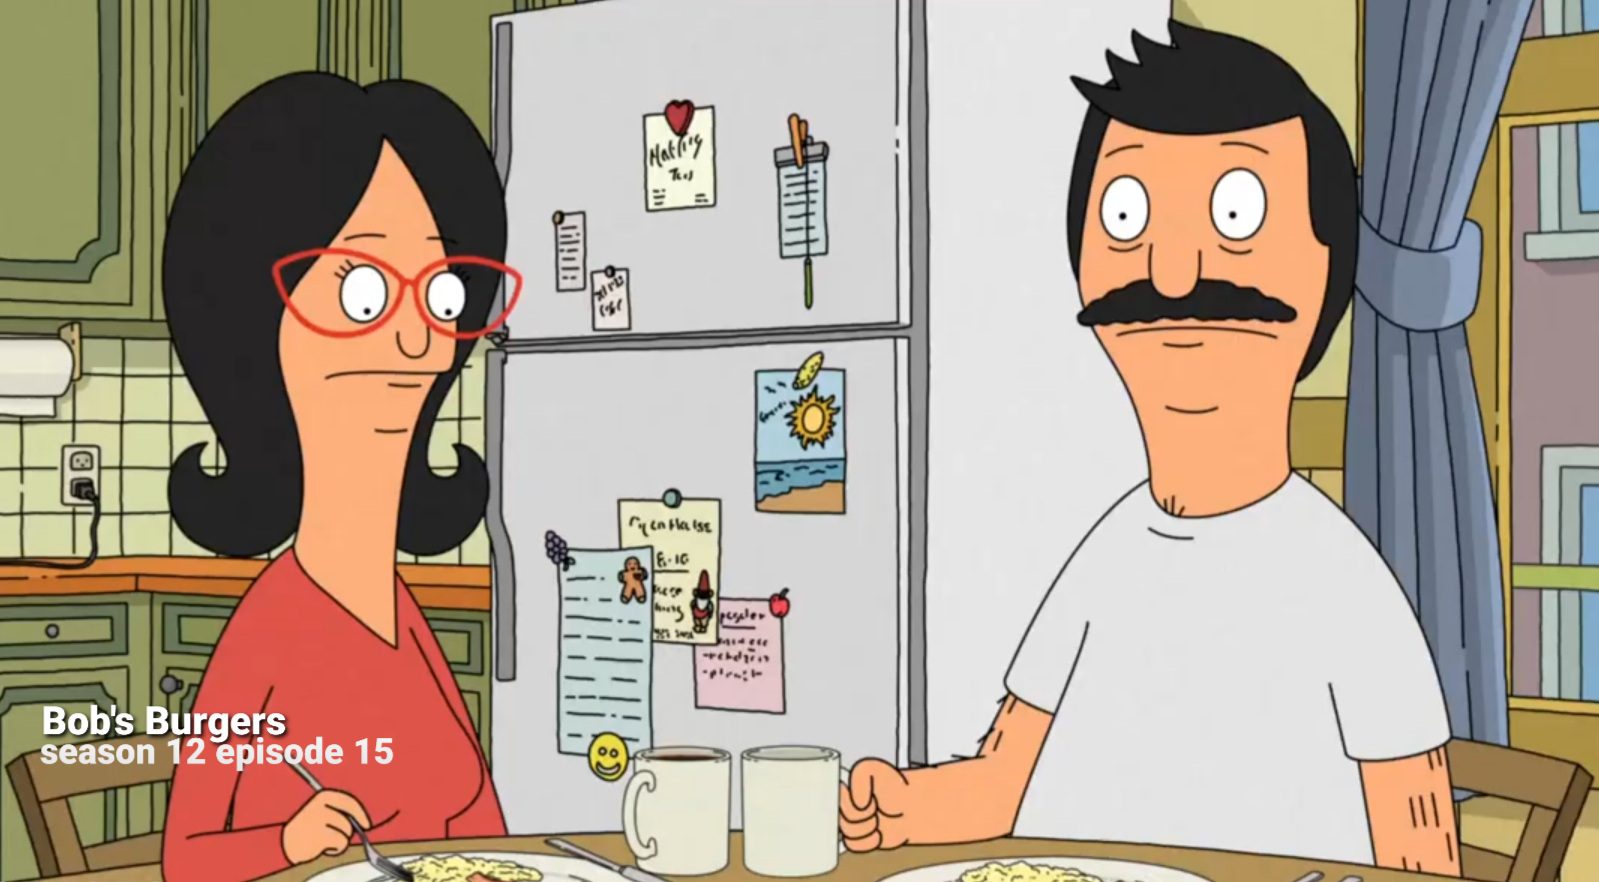 Bobs Burgers season 12 episode 15 release time and watch online